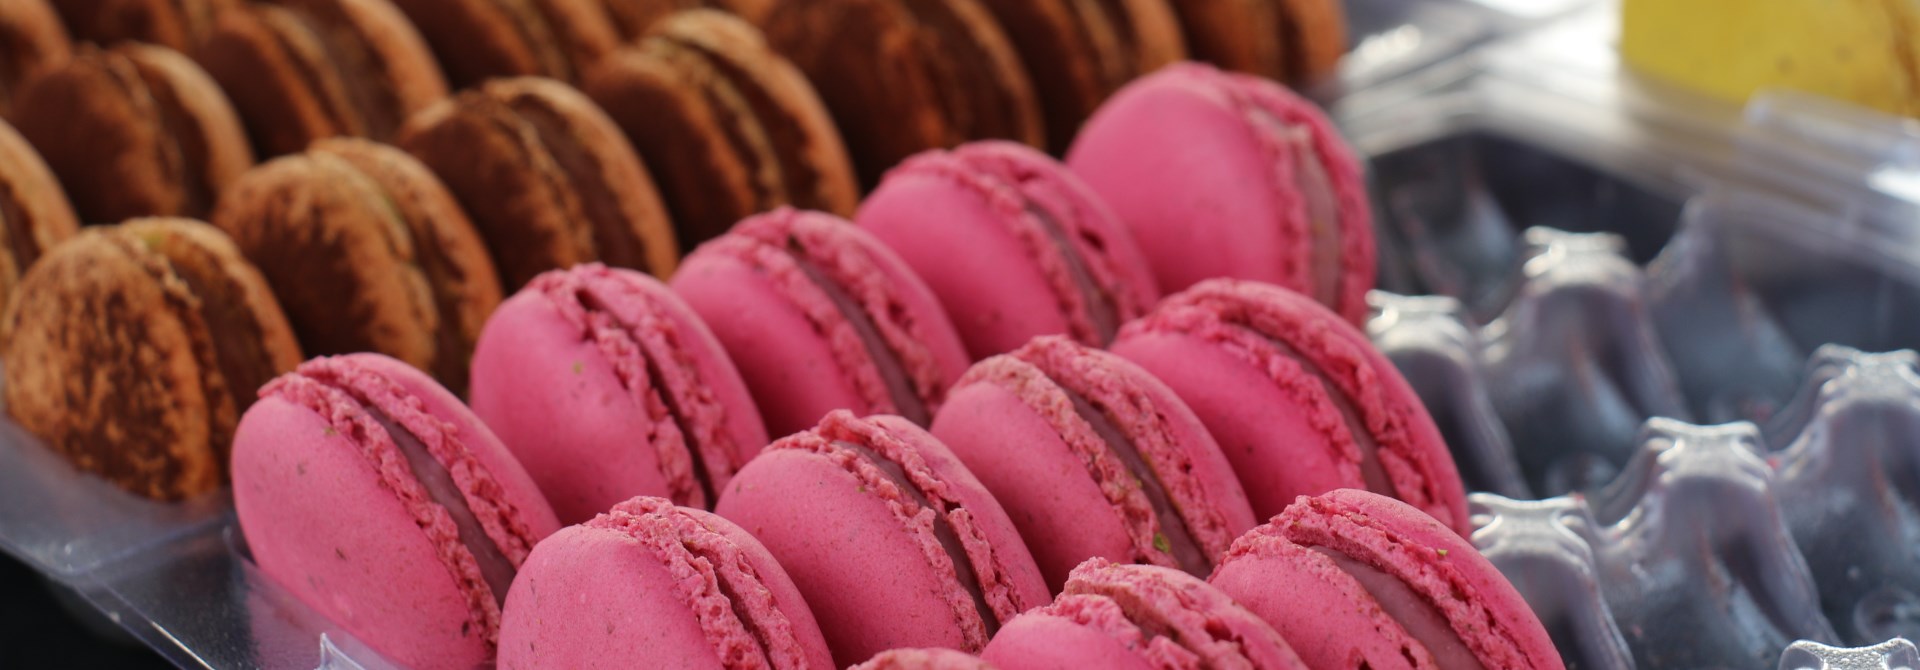 Twelve bright pink macarons with chocolate macarons behind, neatly displayed in a plastic holder.